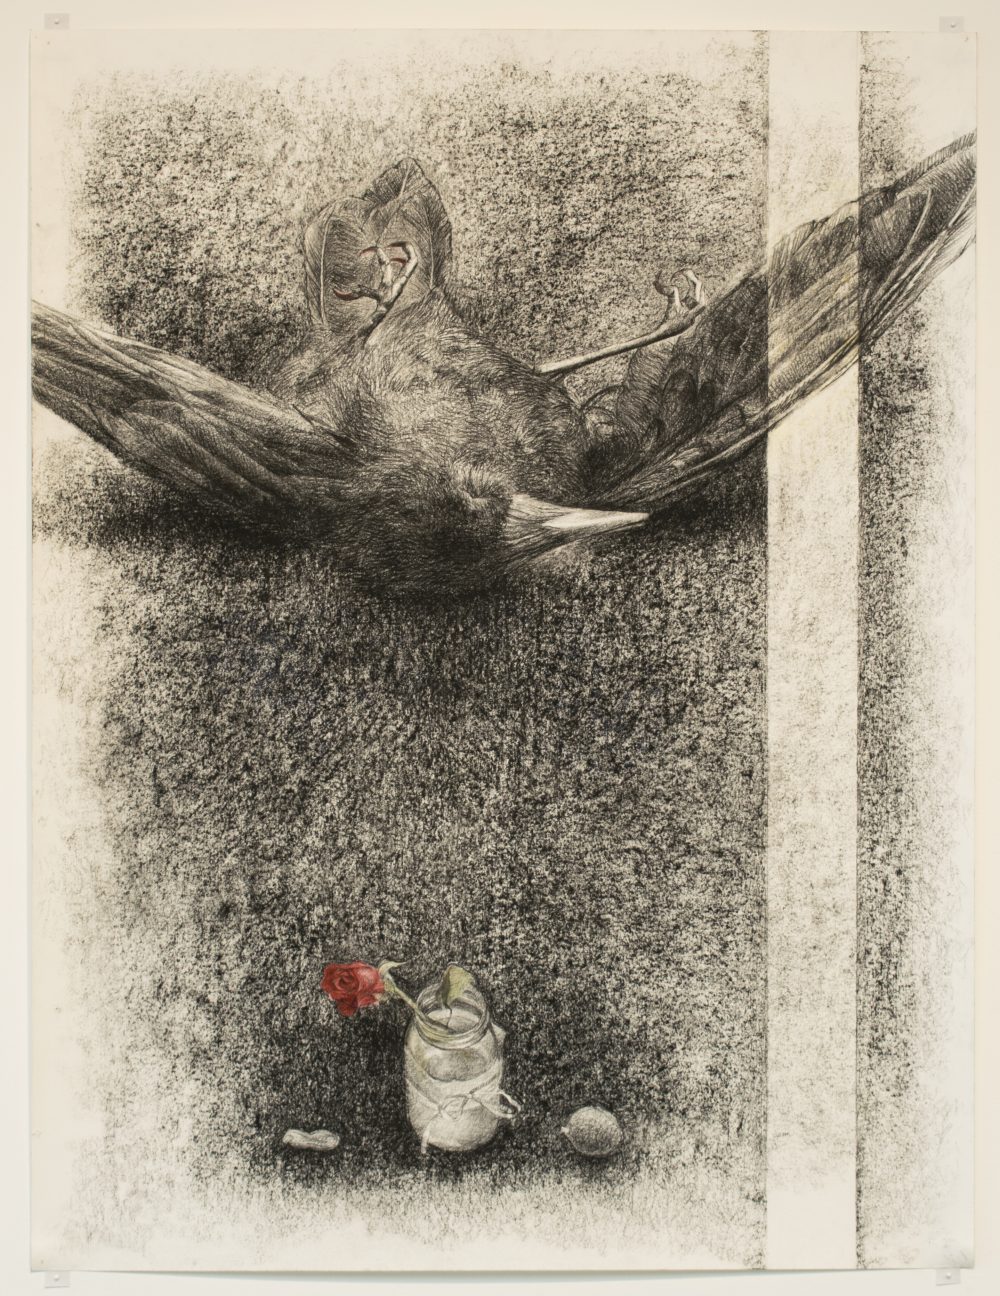 Charcoal and pastel drawing of dead bird on its back with a red rose in a jar of water beside it.